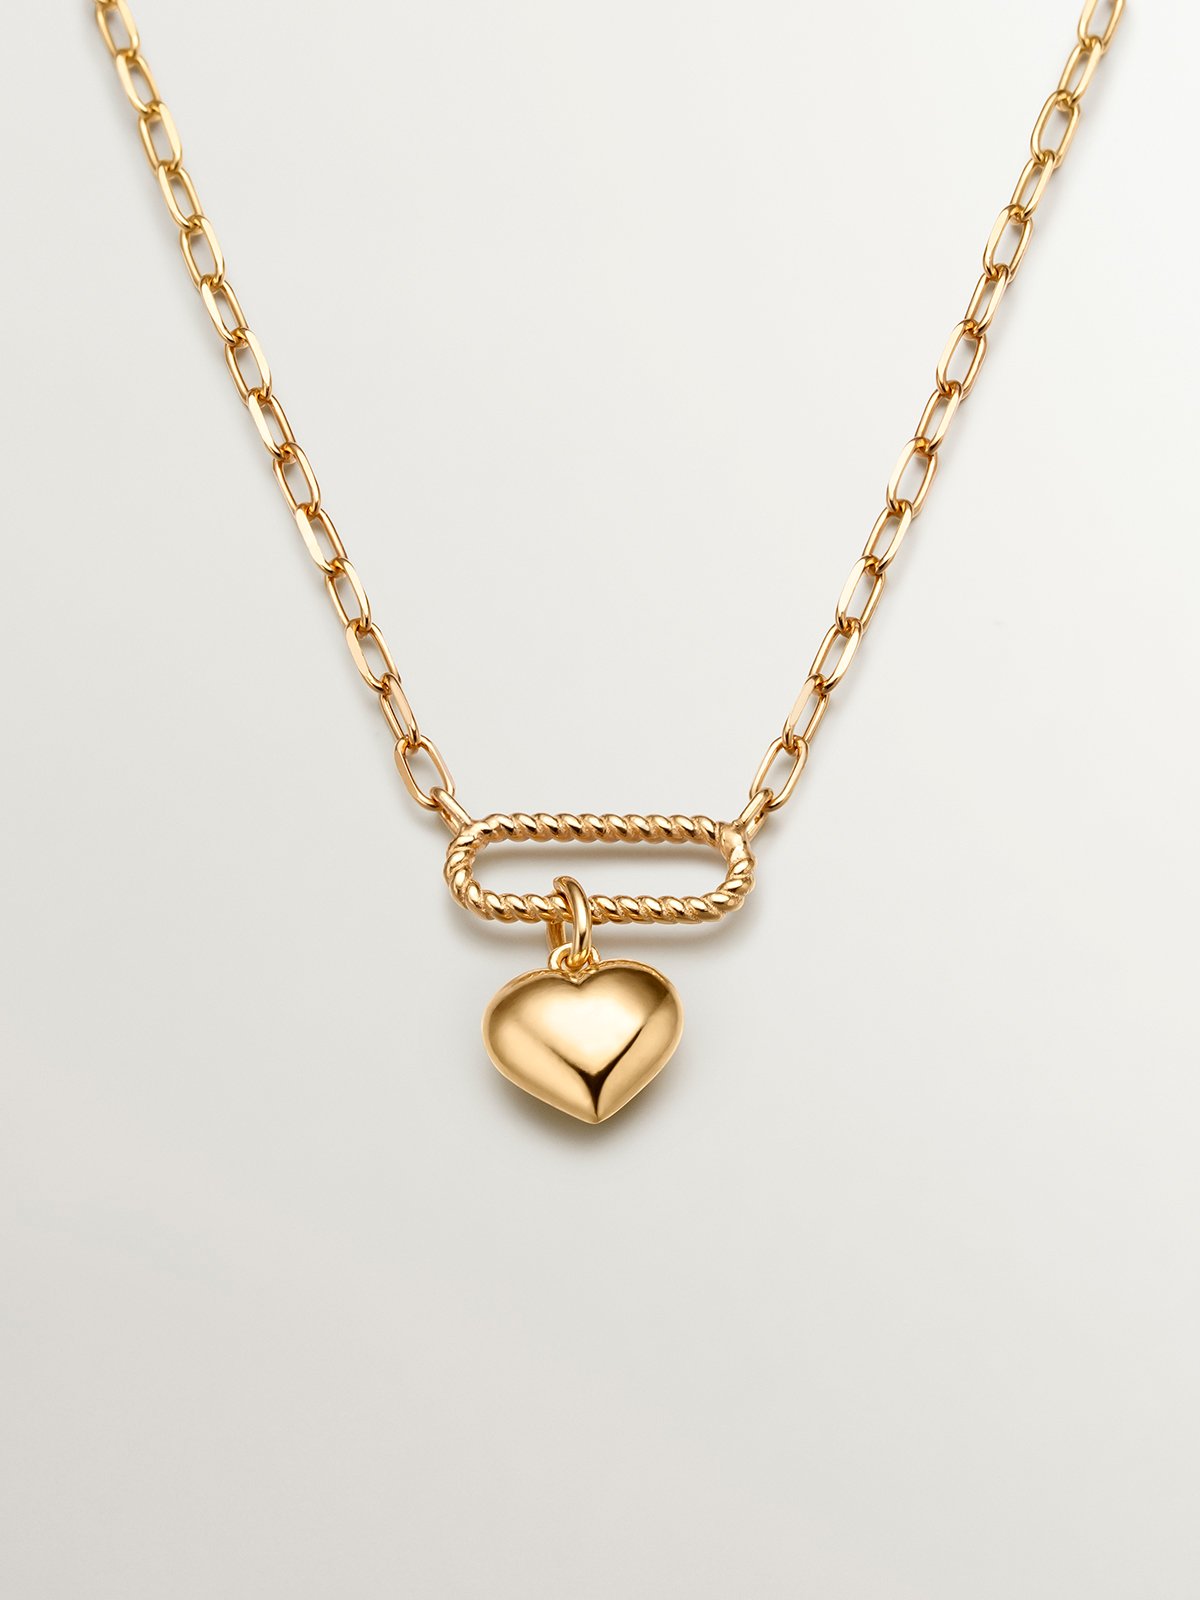 925 Silver Silver Link Collar in 18k yellow gold with a heart